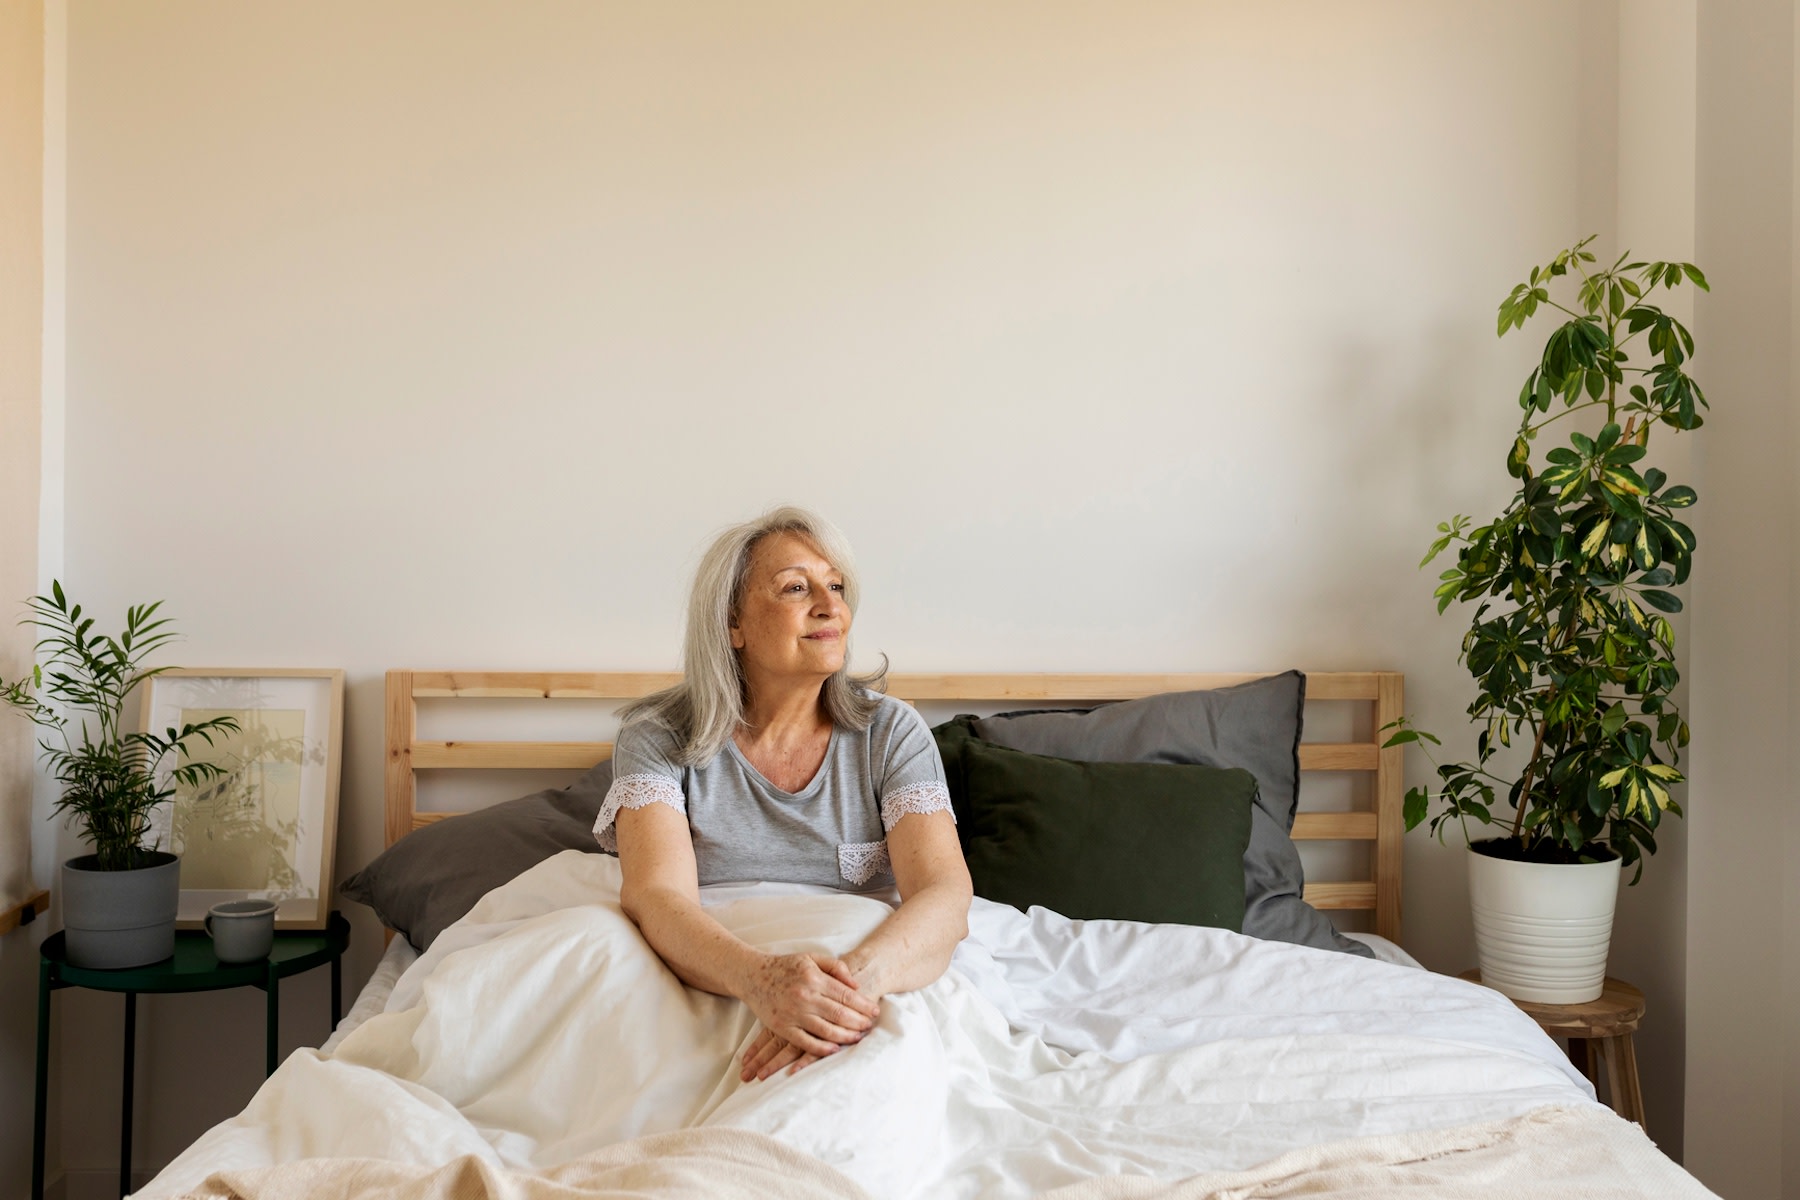 A calm woman sitting in bed practicing mindfulness and looking to her left as she focuses on how to be more present in her daily life.